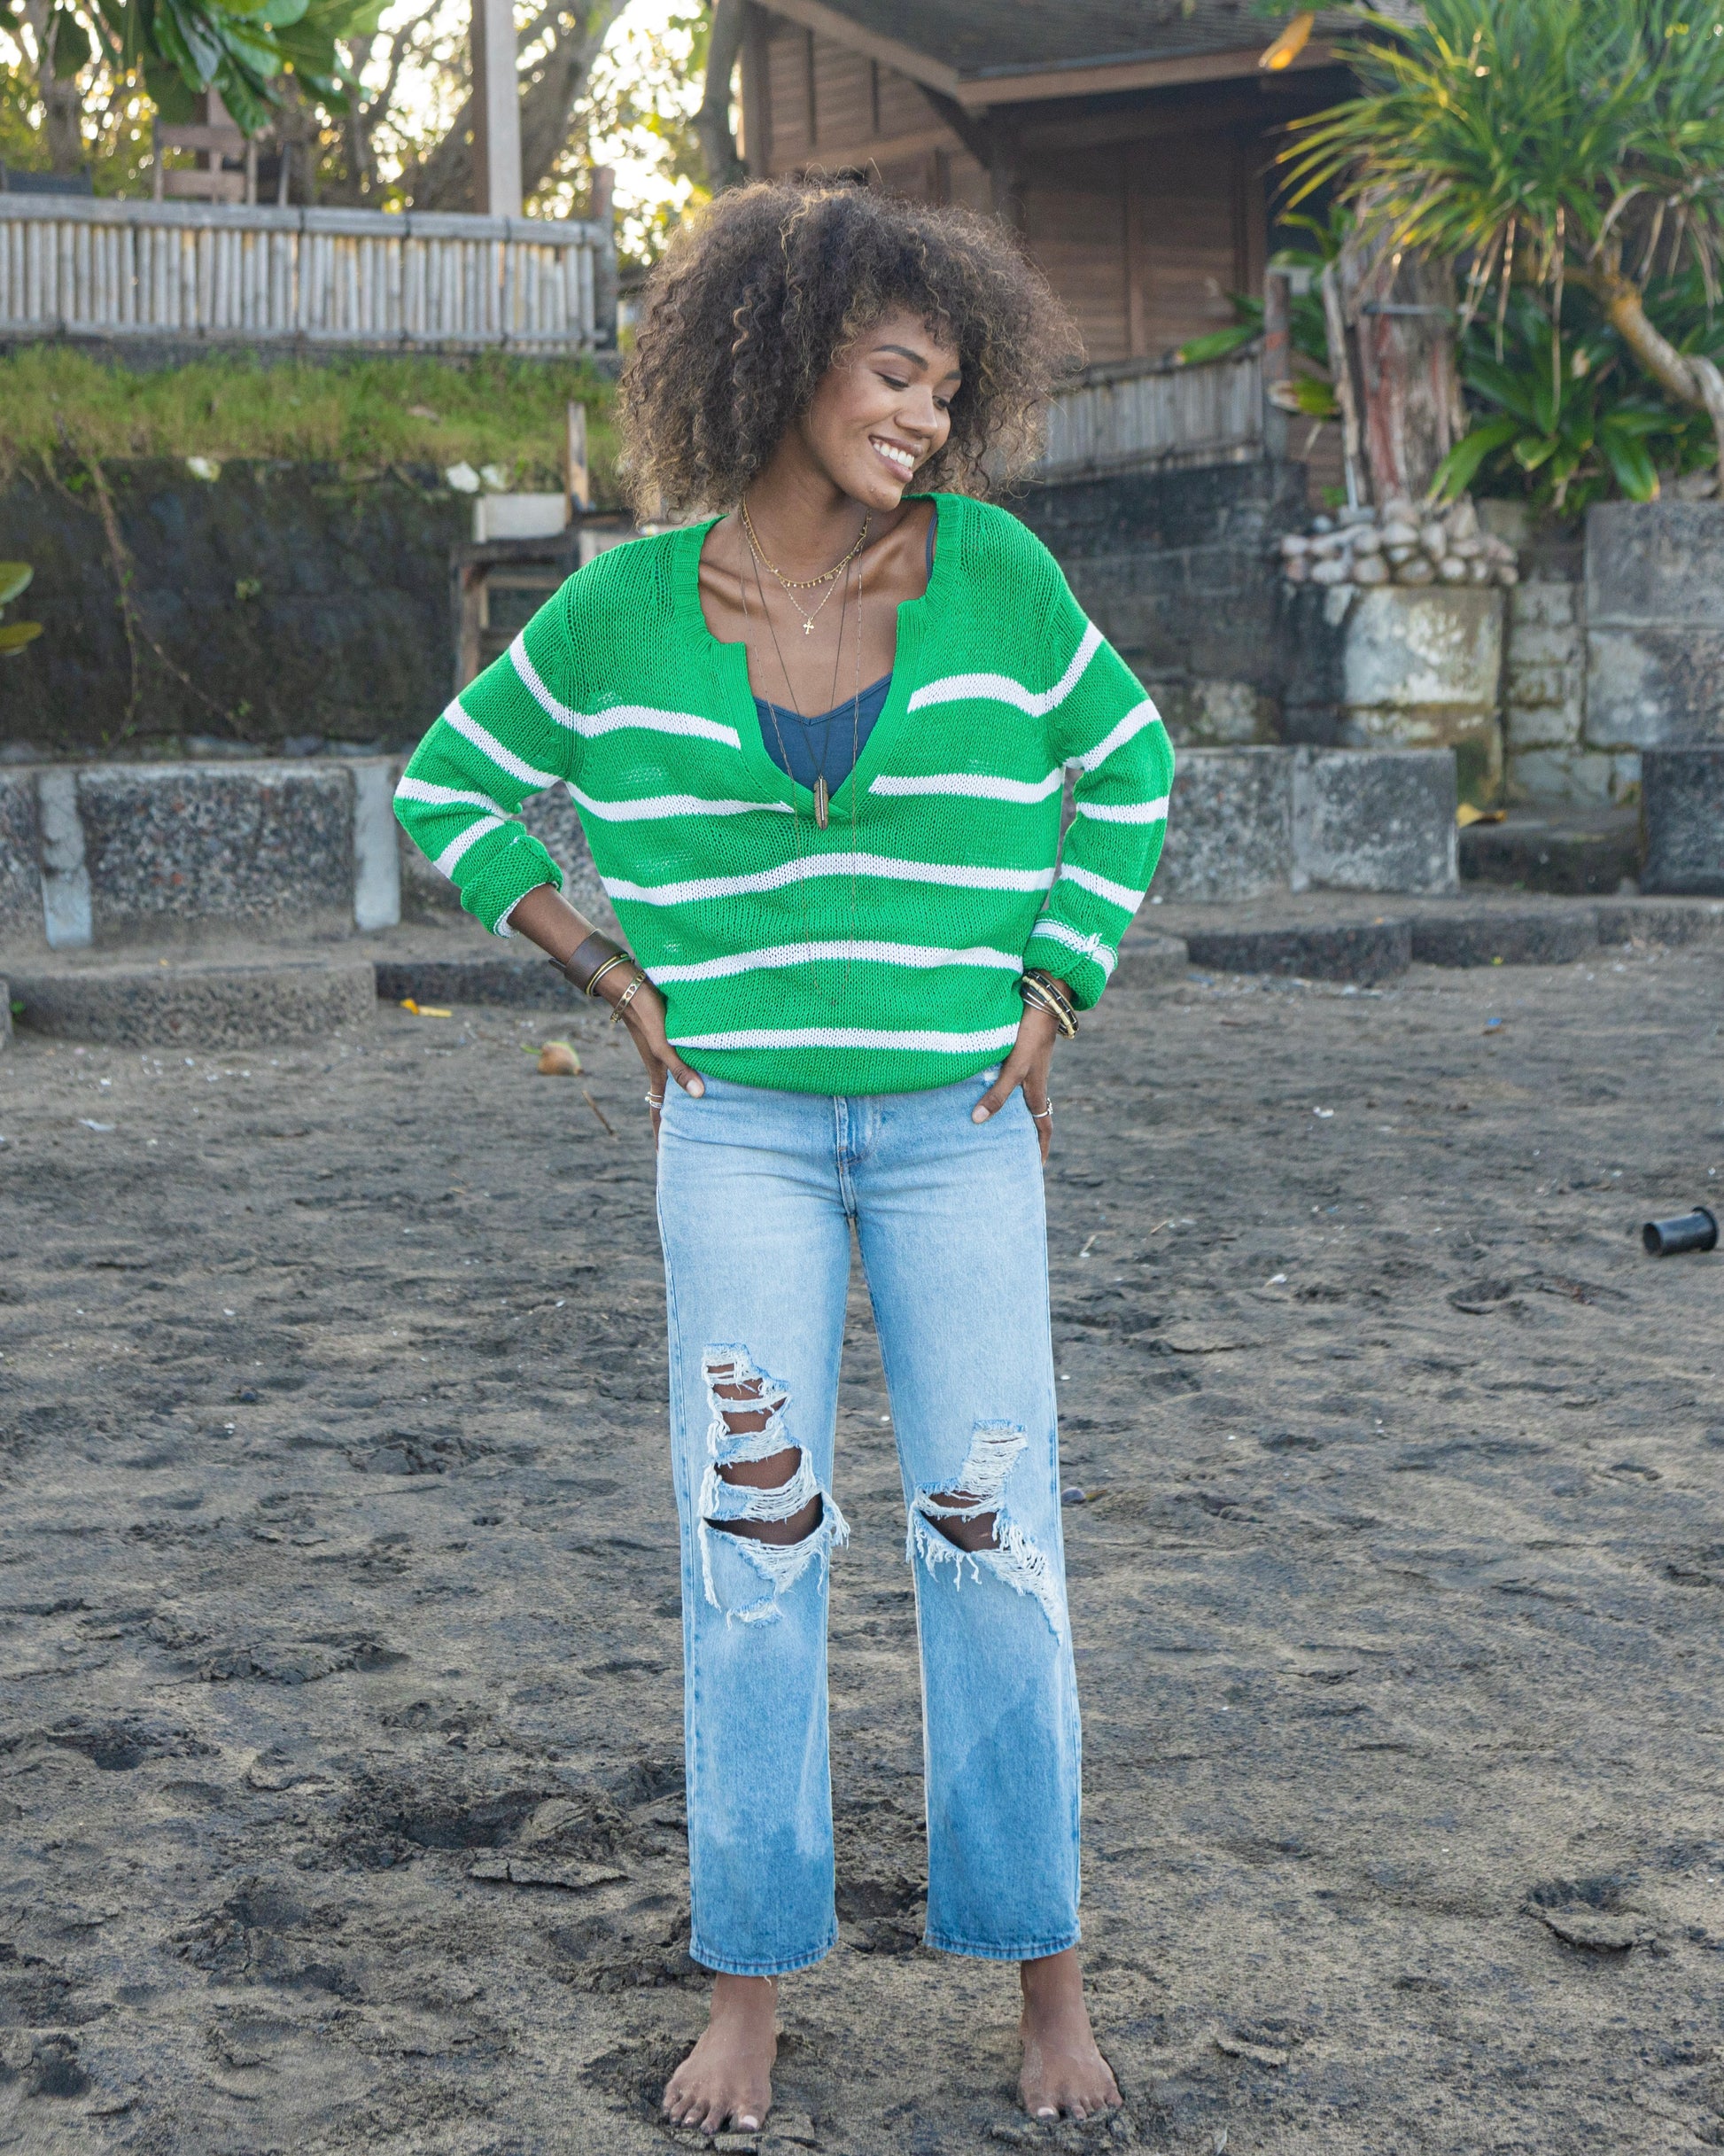 Model wearing Wooden Ships Margot Stripe Top in emerald and white wearing jeans standing outside